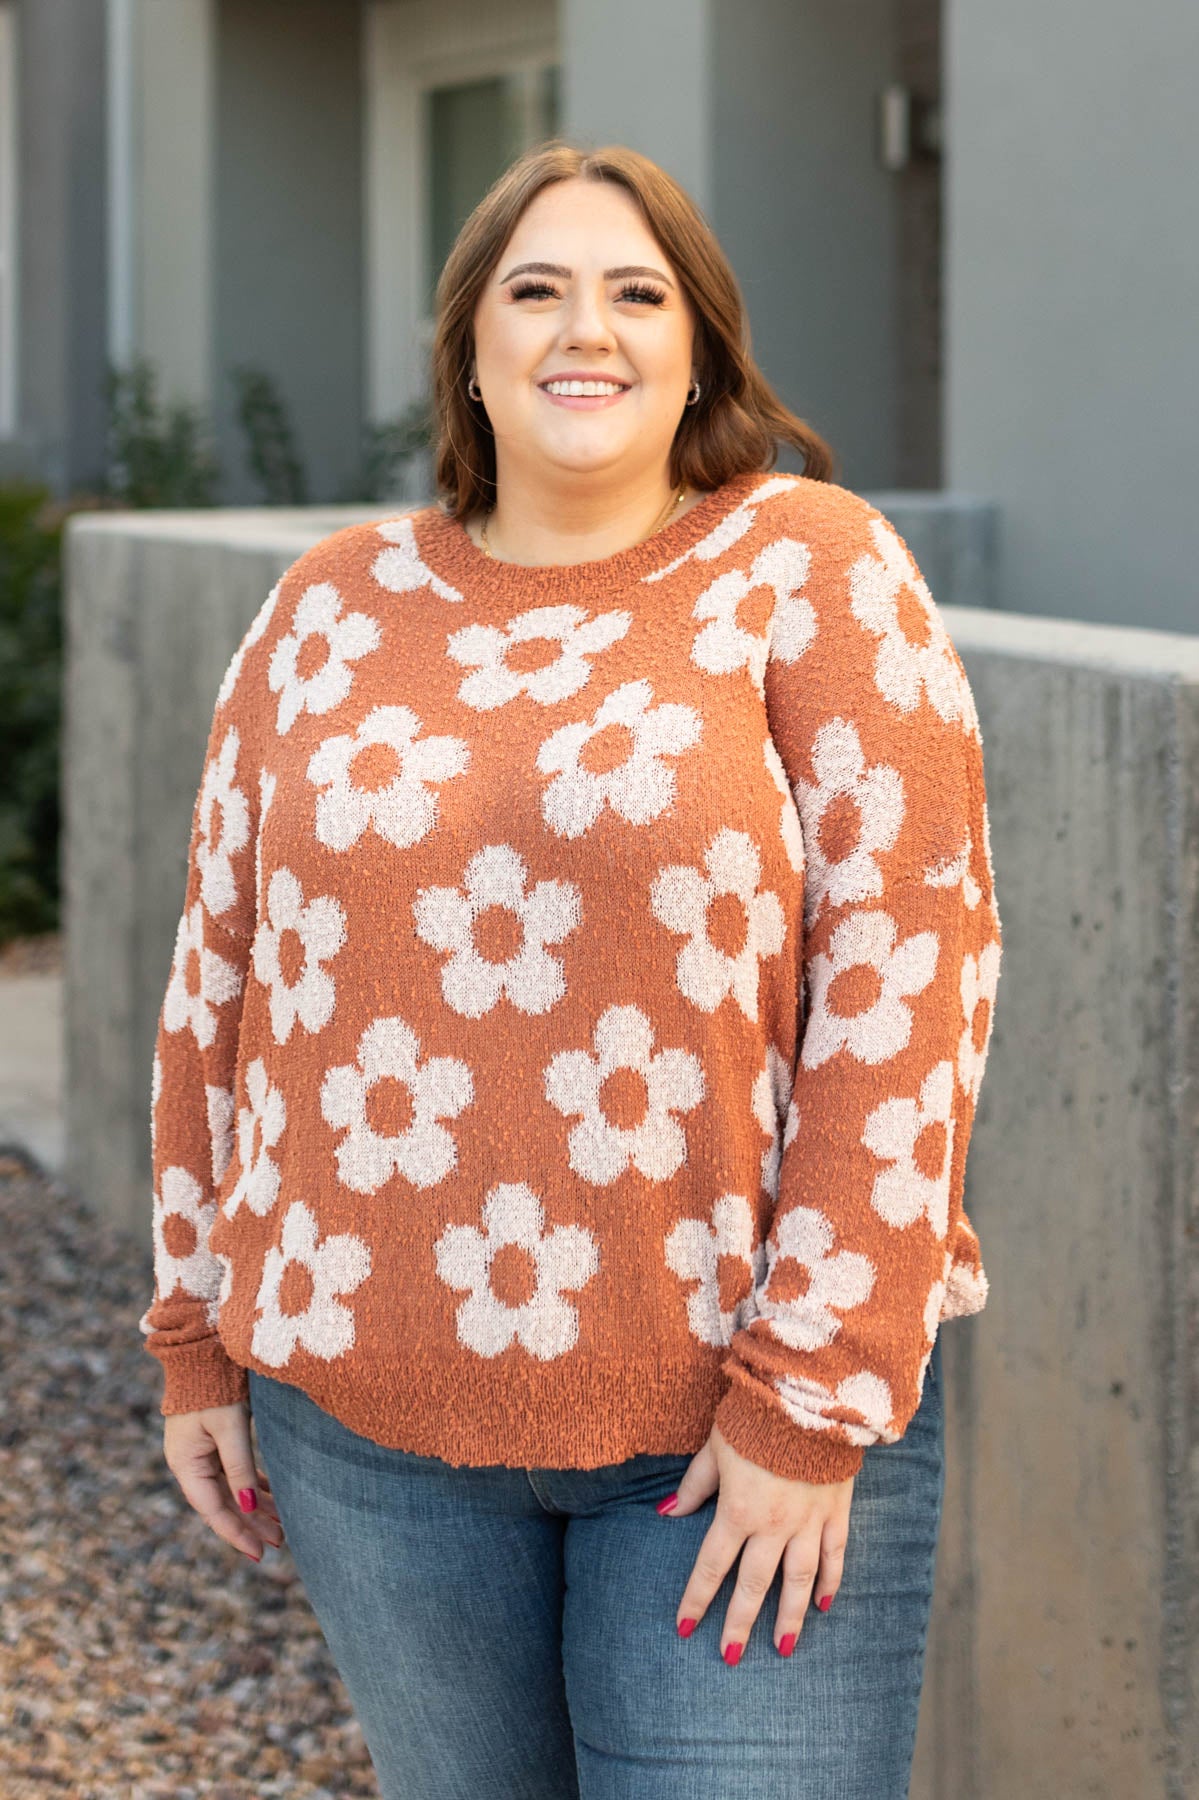 Plus size caramel sweater with long sleeves